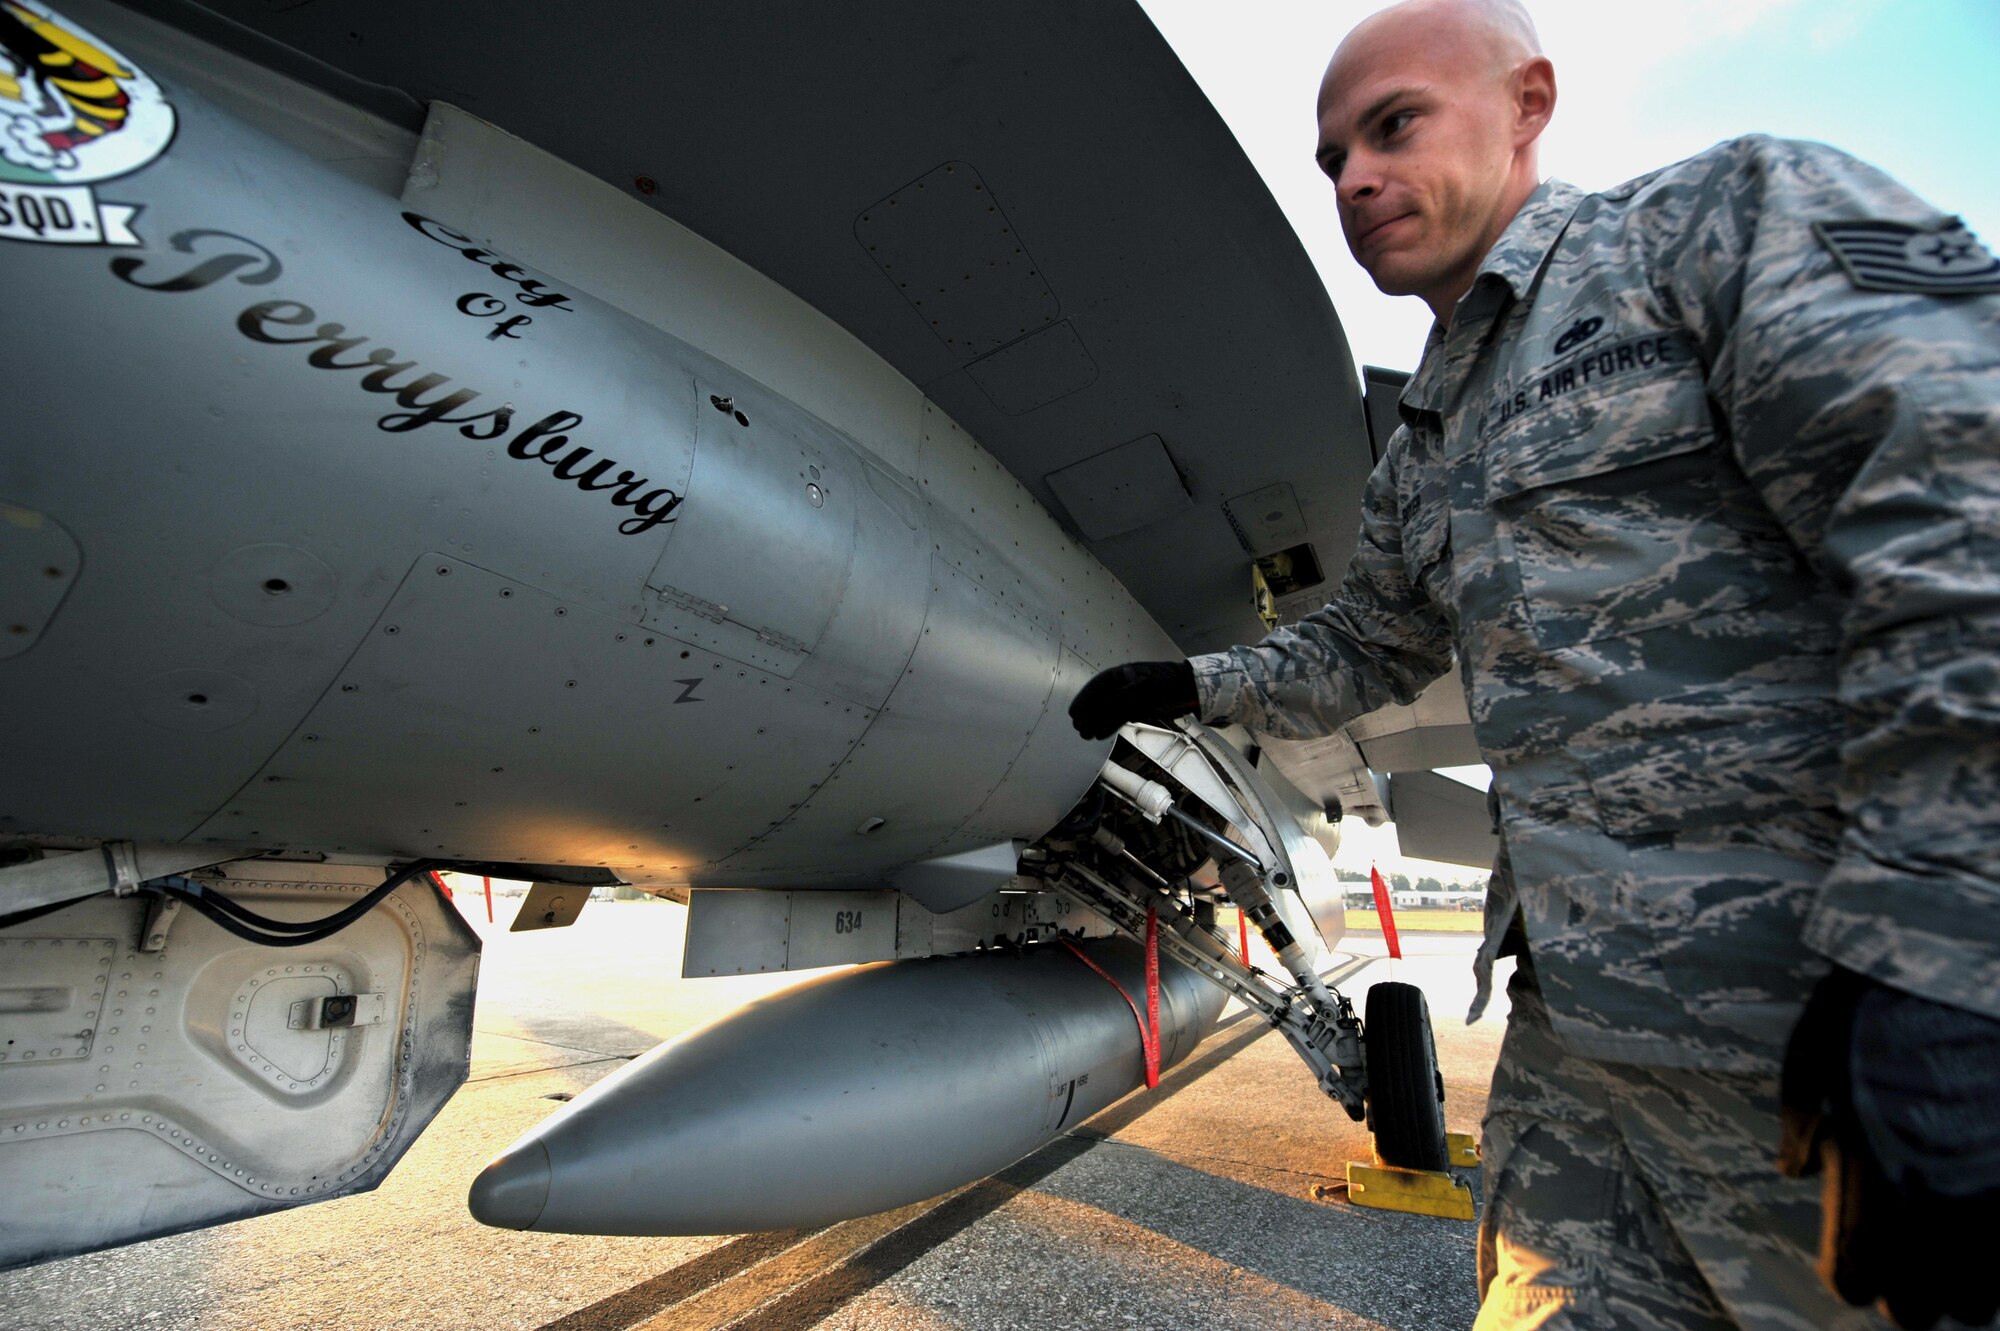 U.S. Air Force Tech. Sgt. Joe Boyer,  a crew chief assigned to the 180th Fighter Wing, Ohio Air National Guard, makes initial checks on an F-16 Fighting Falcon prior to the start of flying operations during a training exercise at MacDill Air Force Base in Tampa, Florida on Feb. 2, 2017. The 180FW brought F-16s and more than 150 maintainers, pilots, and operations support personnel to MacDill AFB for a two week training exercise which included basic fighter maneuvers against F-18 Hornets from the Canadian 425th Tactical Fighter Squadron, sharpening the combat capabilities of the 180FW Airmen. (U.S. Air National Guard photo by Tech. Sgt. Nic Kuetemeyer)